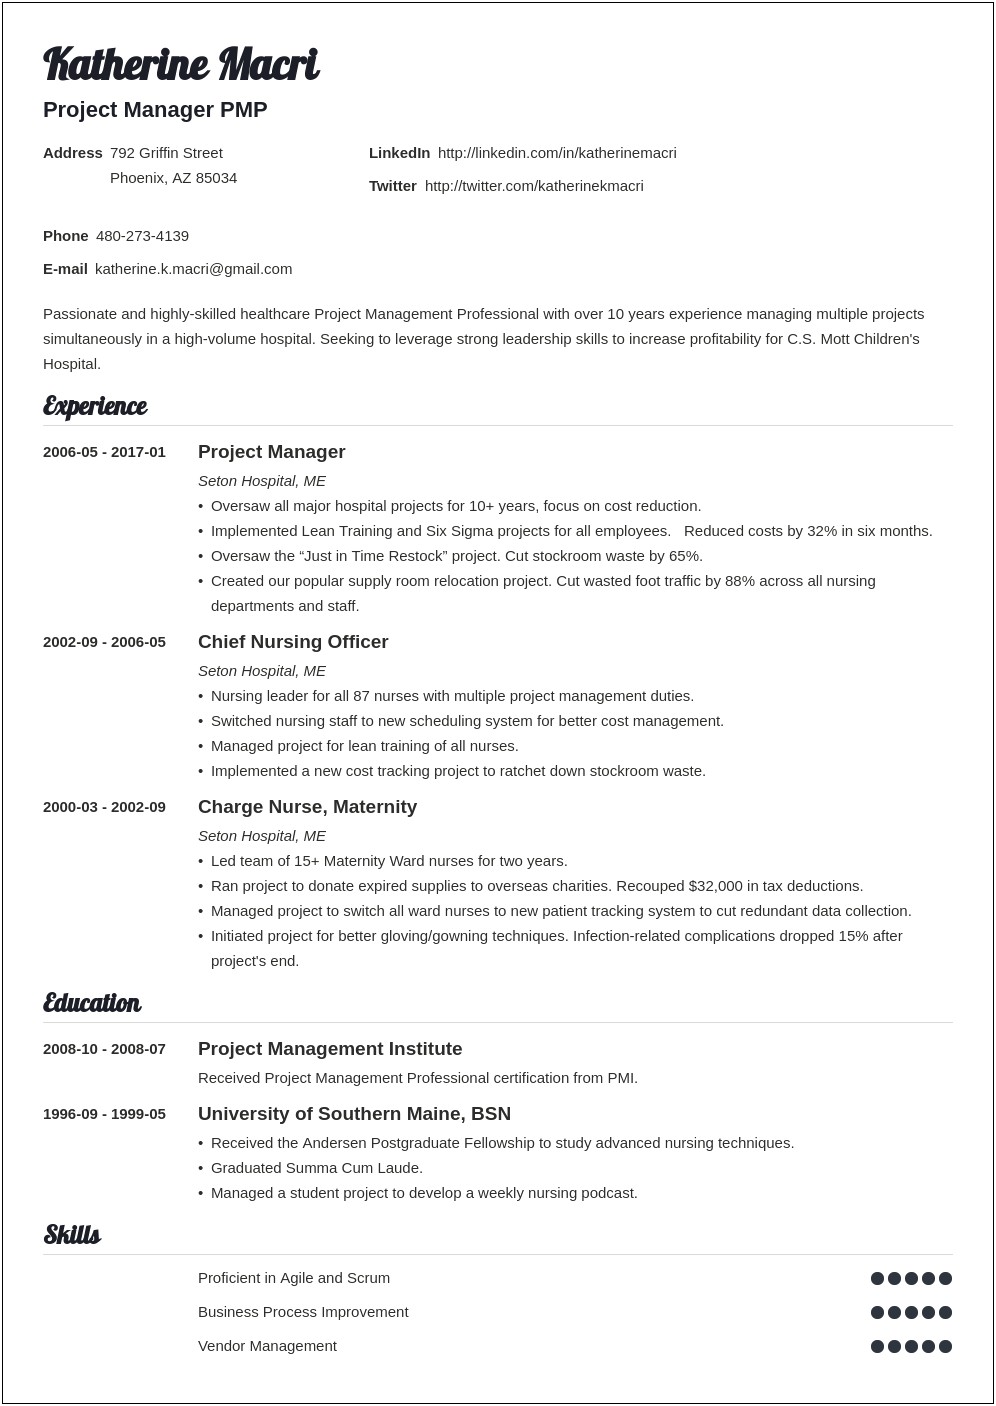 Resume Skills Section Project Management